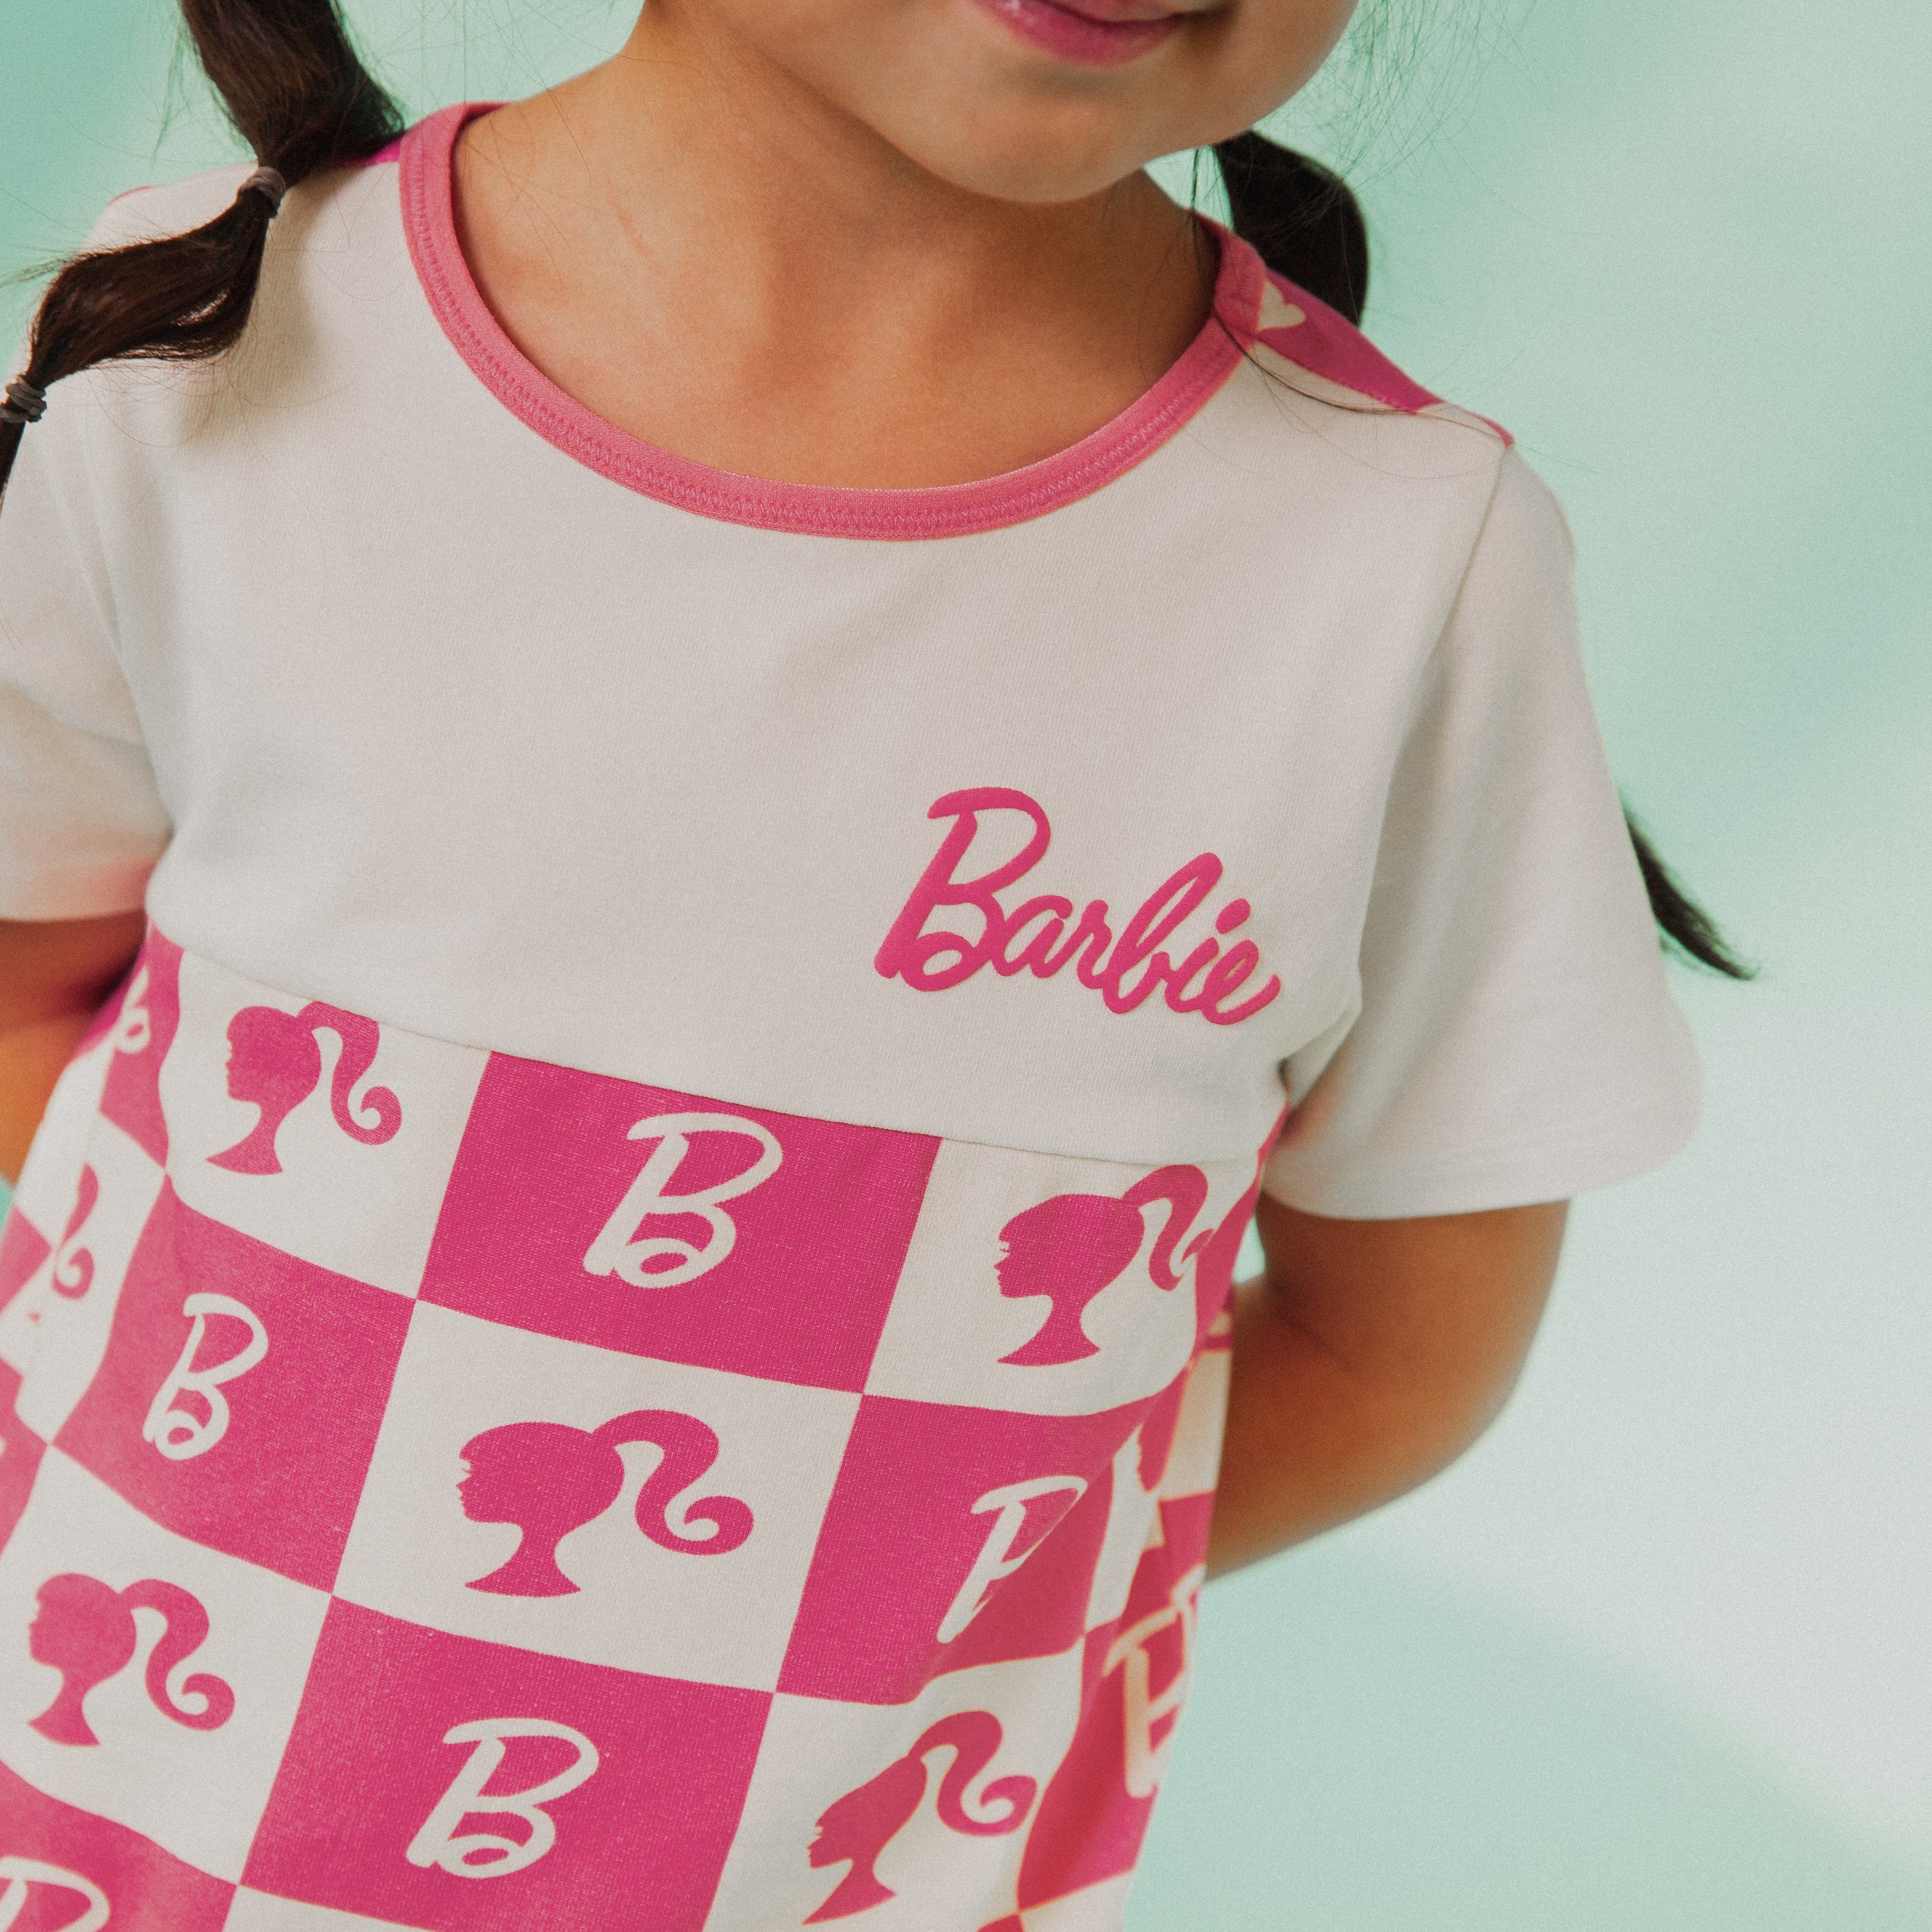 Short Sleeve Rag Romper - Barbie Check - Mattel Barbie Collection by RAGS